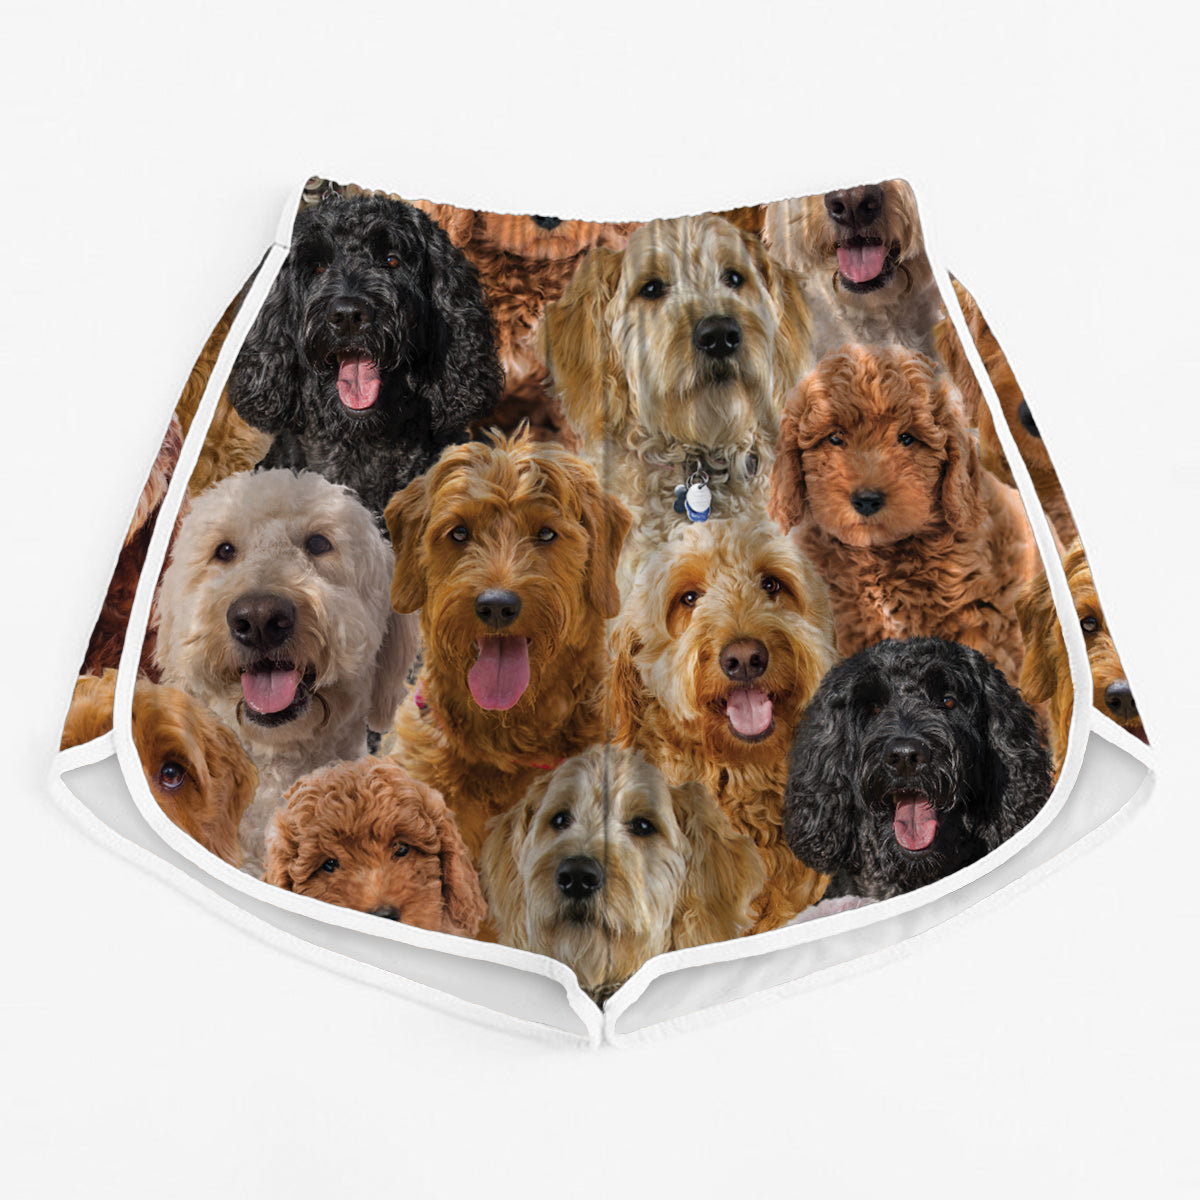 You Will Have A Bunch Of Goldendoodles - Women's Running Shorts V1